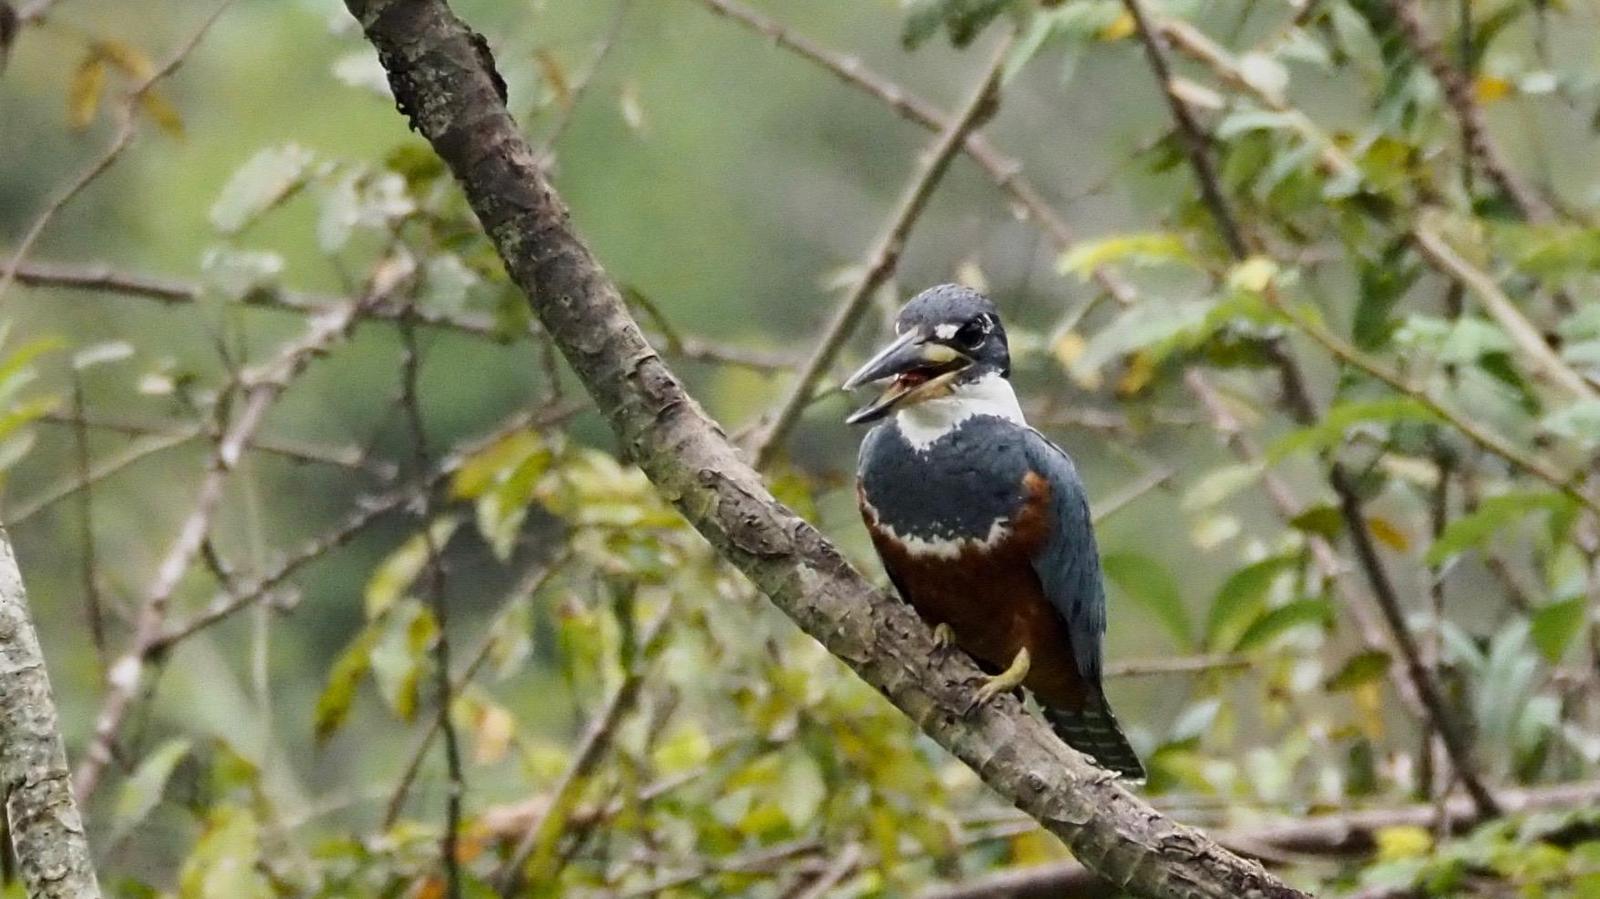 Ringed Kingfisher Photo by Susan Leverton